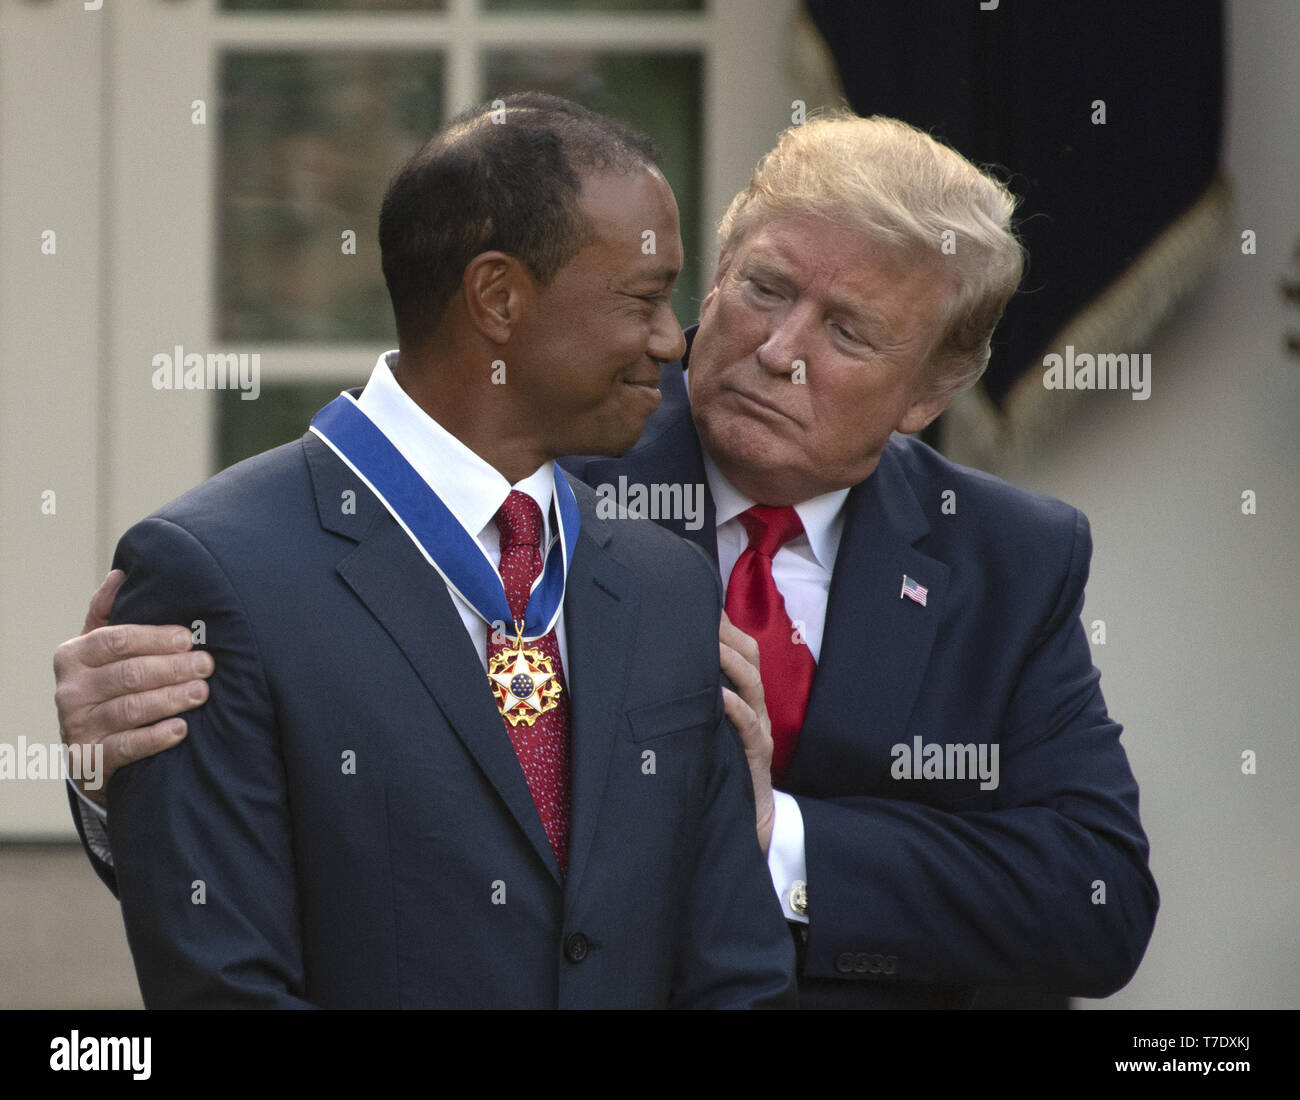 May 6, 2019 - Washington, District of Columbia, U.S. - United States President Donald J. Trump, right, hugs professional golfer Tiger Woods, left, after presenting him the Presidential Medal of Freedom in the Rose Garden of the White House in Washington, DC on May 6, 2019. The Presidential Medal of Freedom is an award bestowed by the President of the United States to recognize those people who have made ''an especially meritorious contribution to the security or national interests of the United States, world peace, cultural or other significant public or private endeavor.''.Credit: Ron Sachs Stock Photo